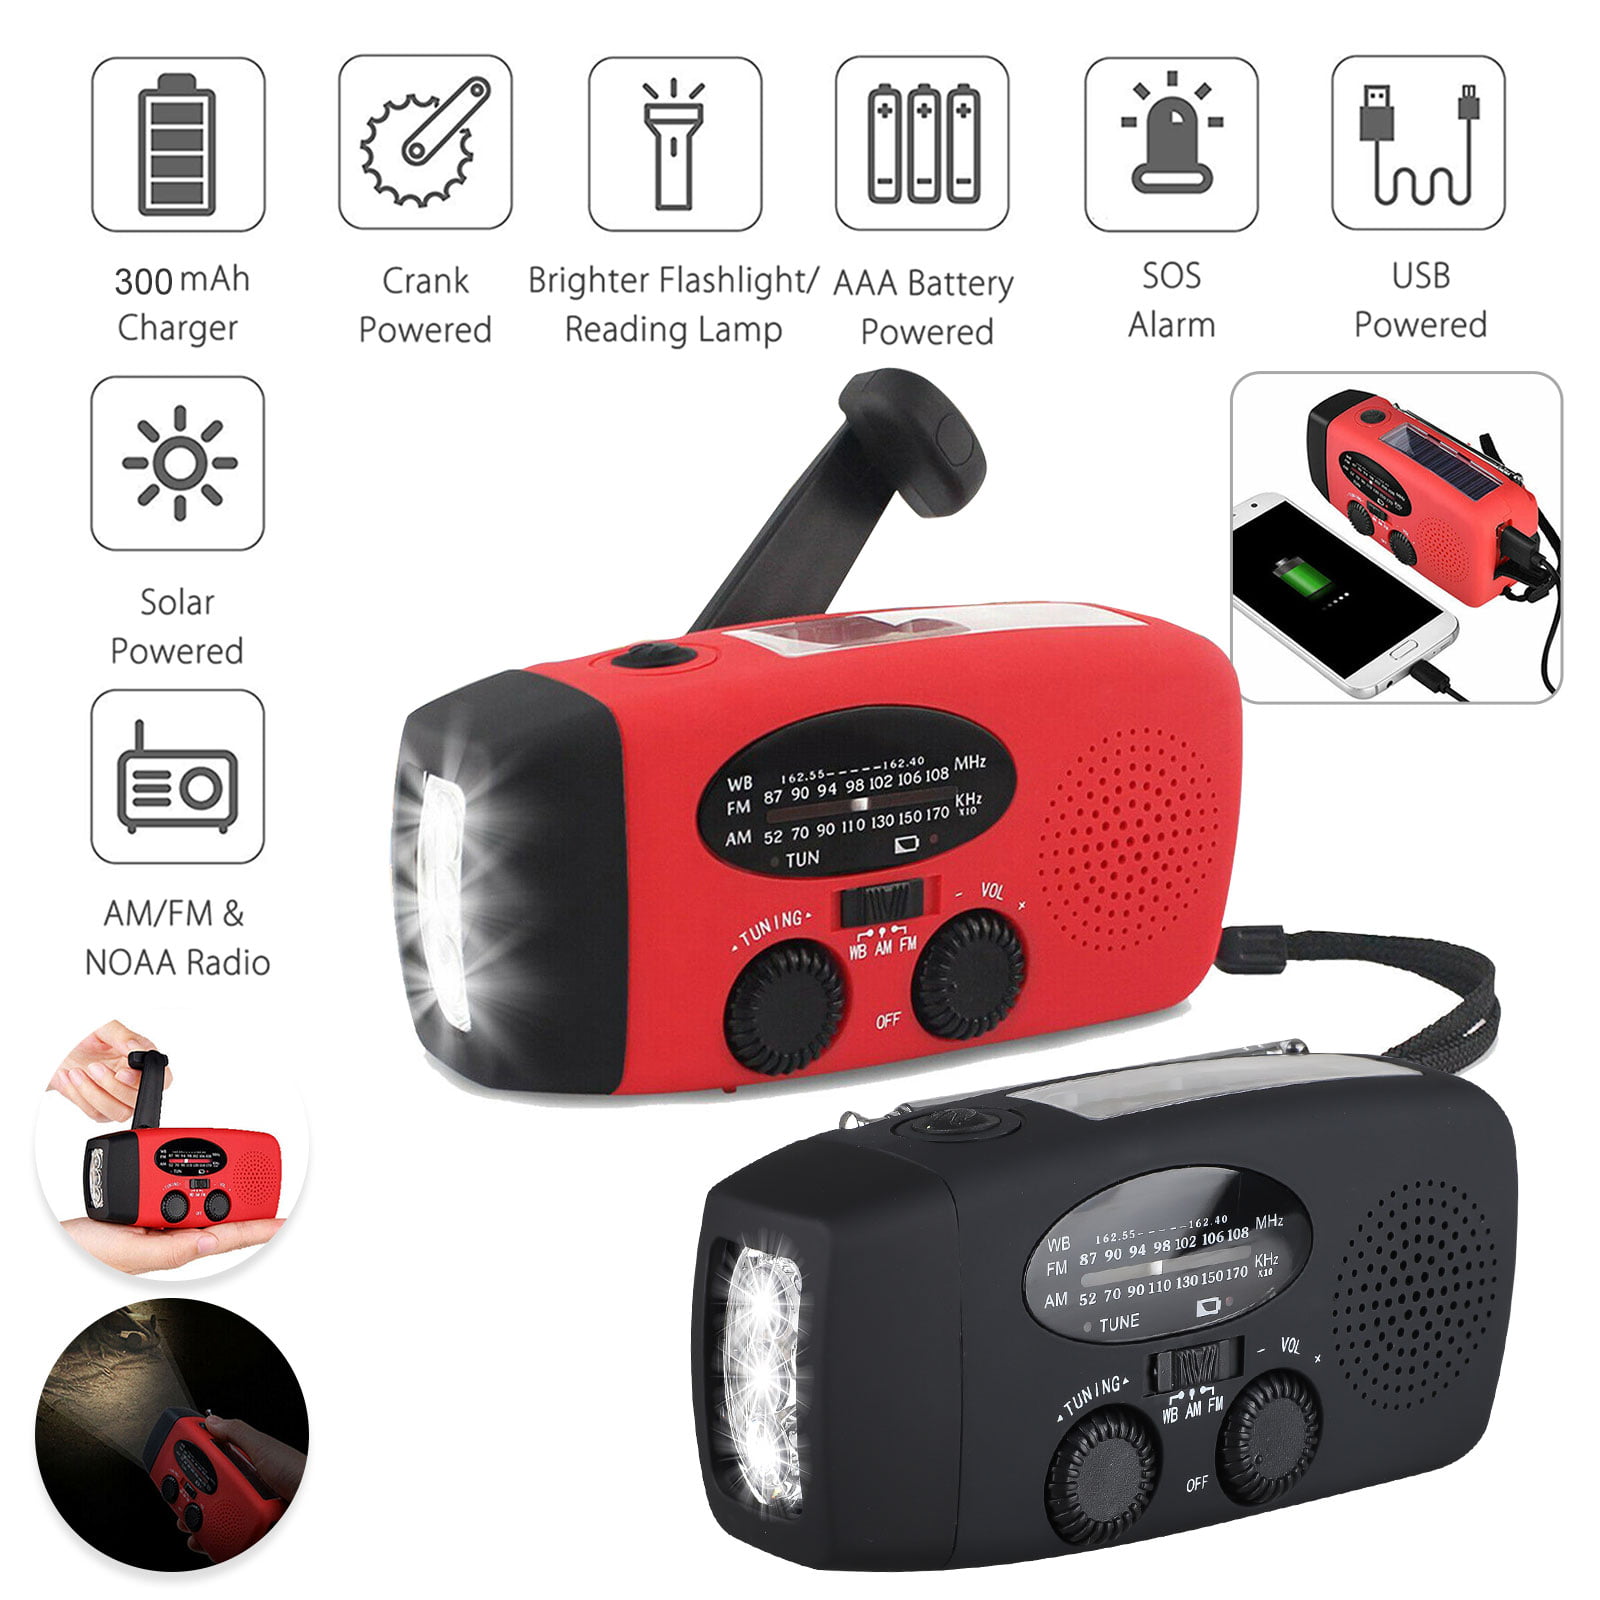 ZHIKE Emergency Solar Hand Crank Portable Radio Green 2000mAh Power Bank USB Charger and SOS Alarm Reading Lamp for Home and Emergency Survival kit AM/FM/NOAA Weather Radio with LED Flashlight 